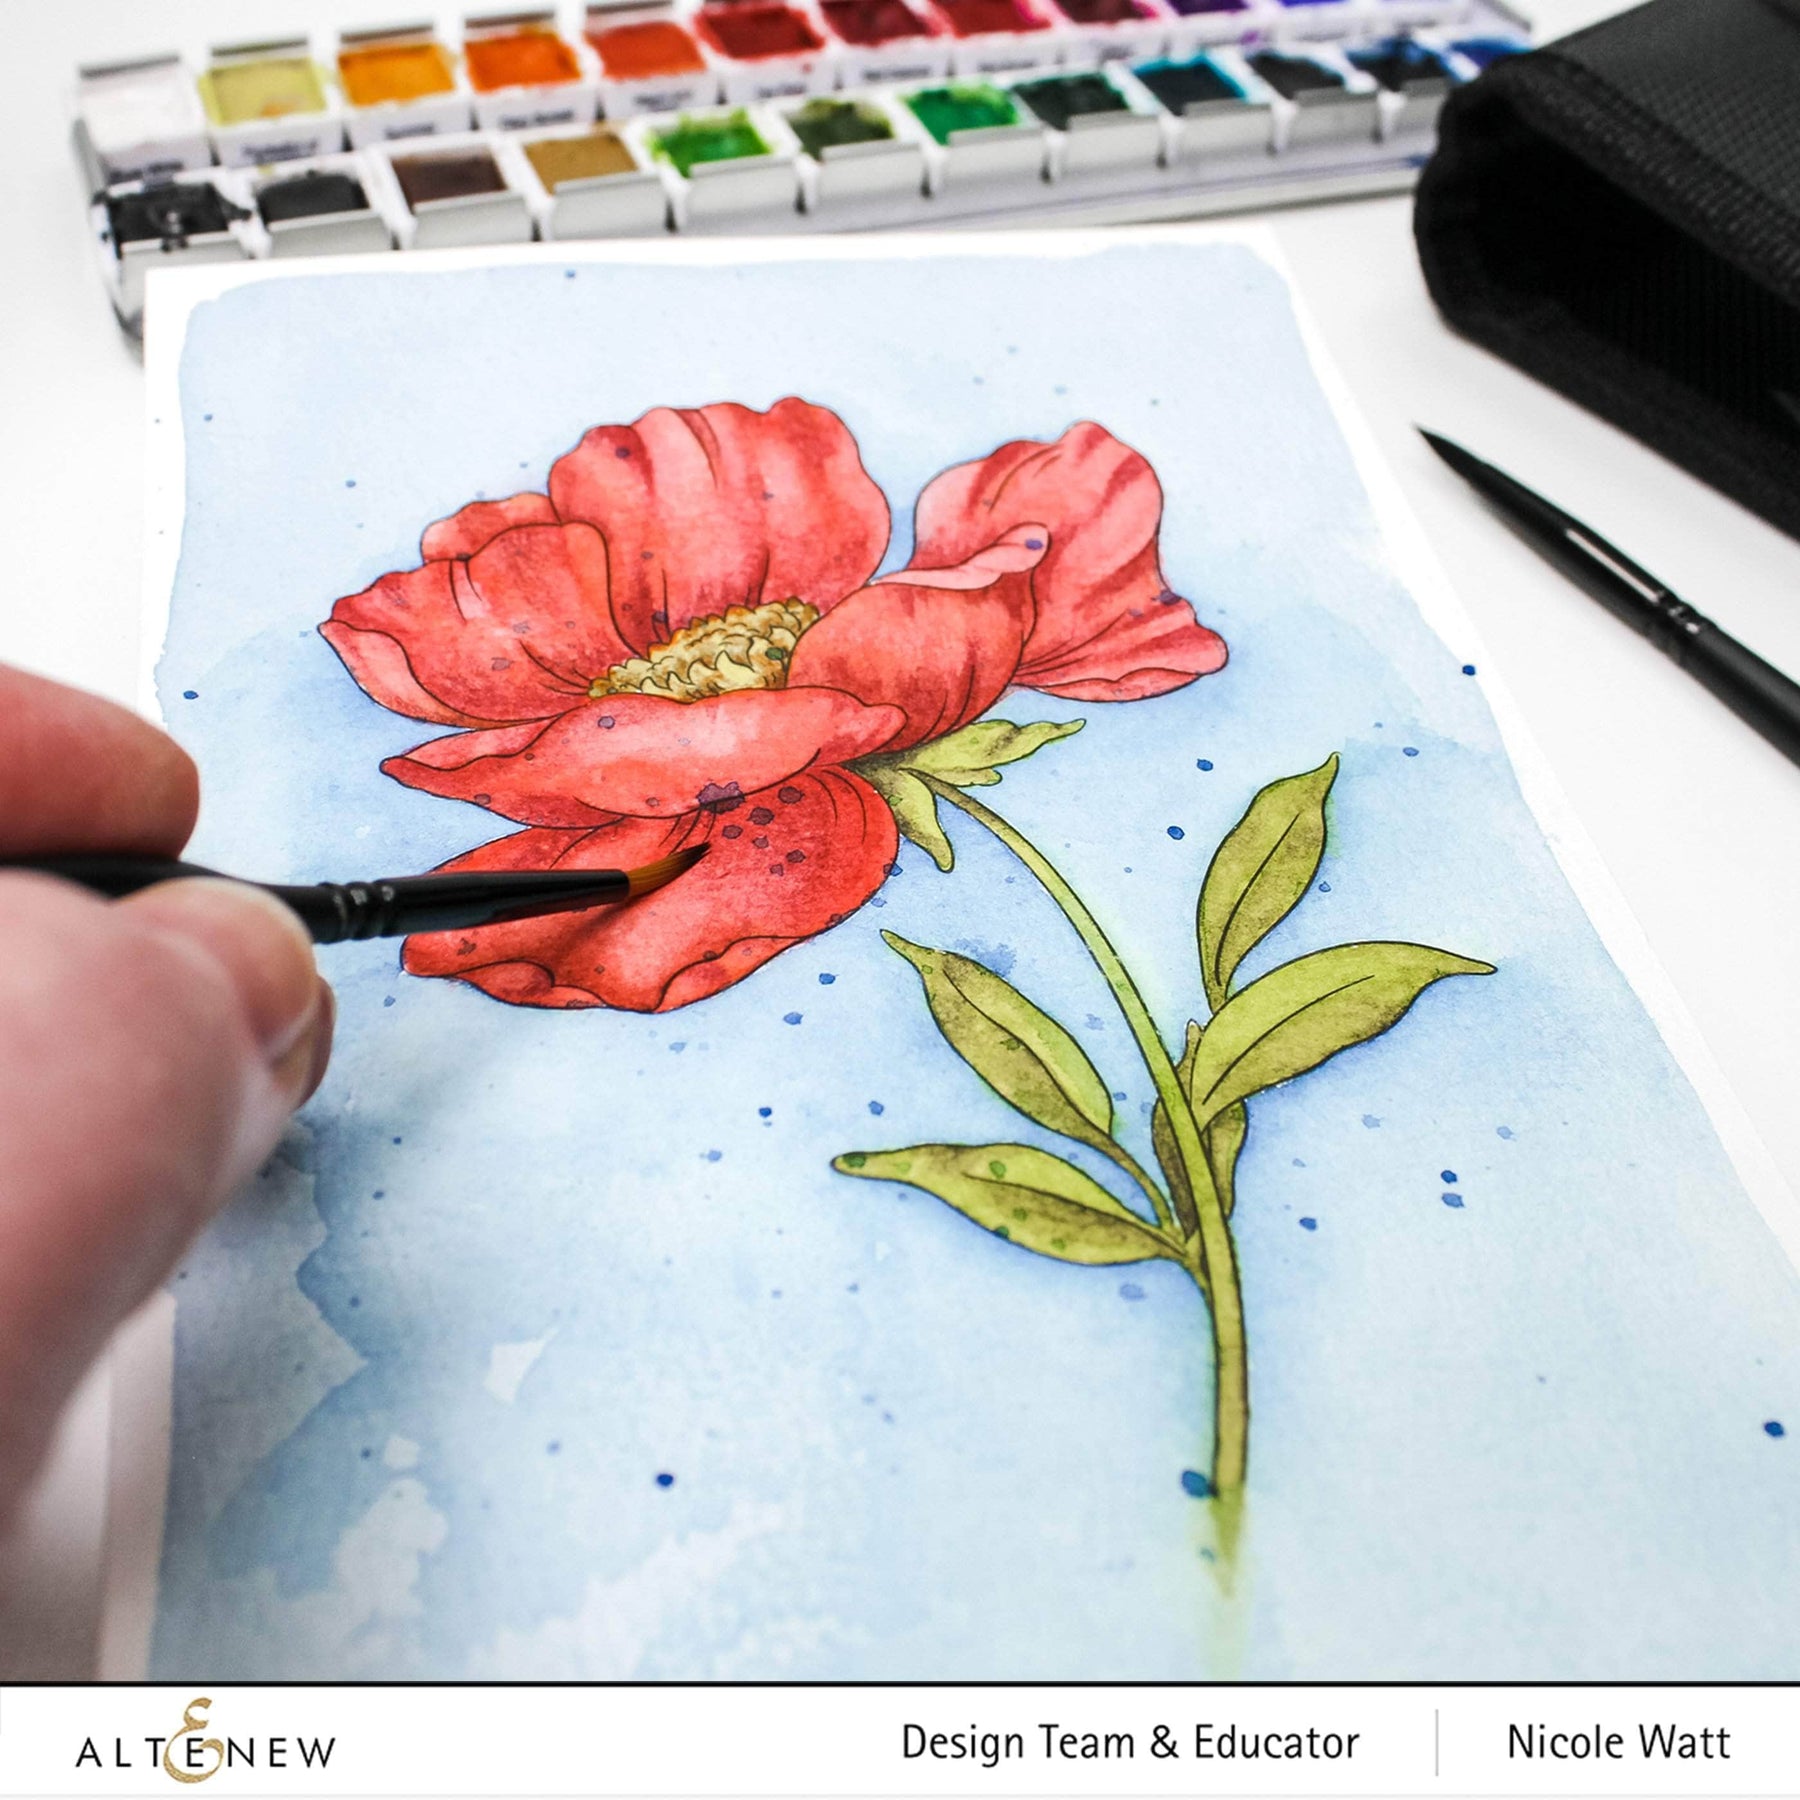 Coloring with Watercolor in Adult Coloring Books 